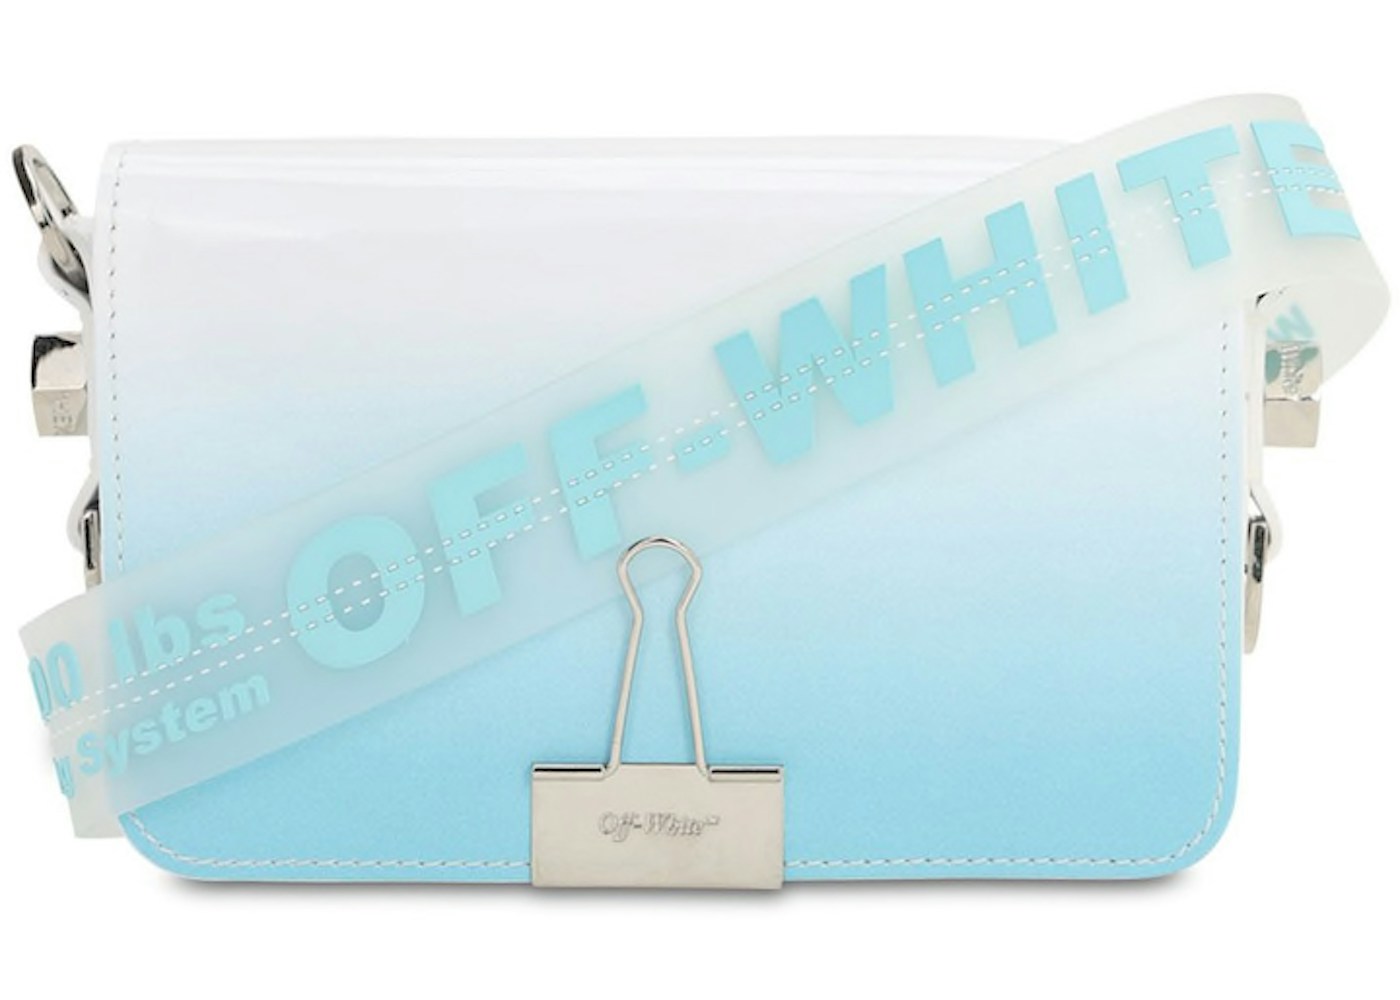 OFF-WHITE Binder Clip Bag Degrade Mini Light Blue in Leather with ...